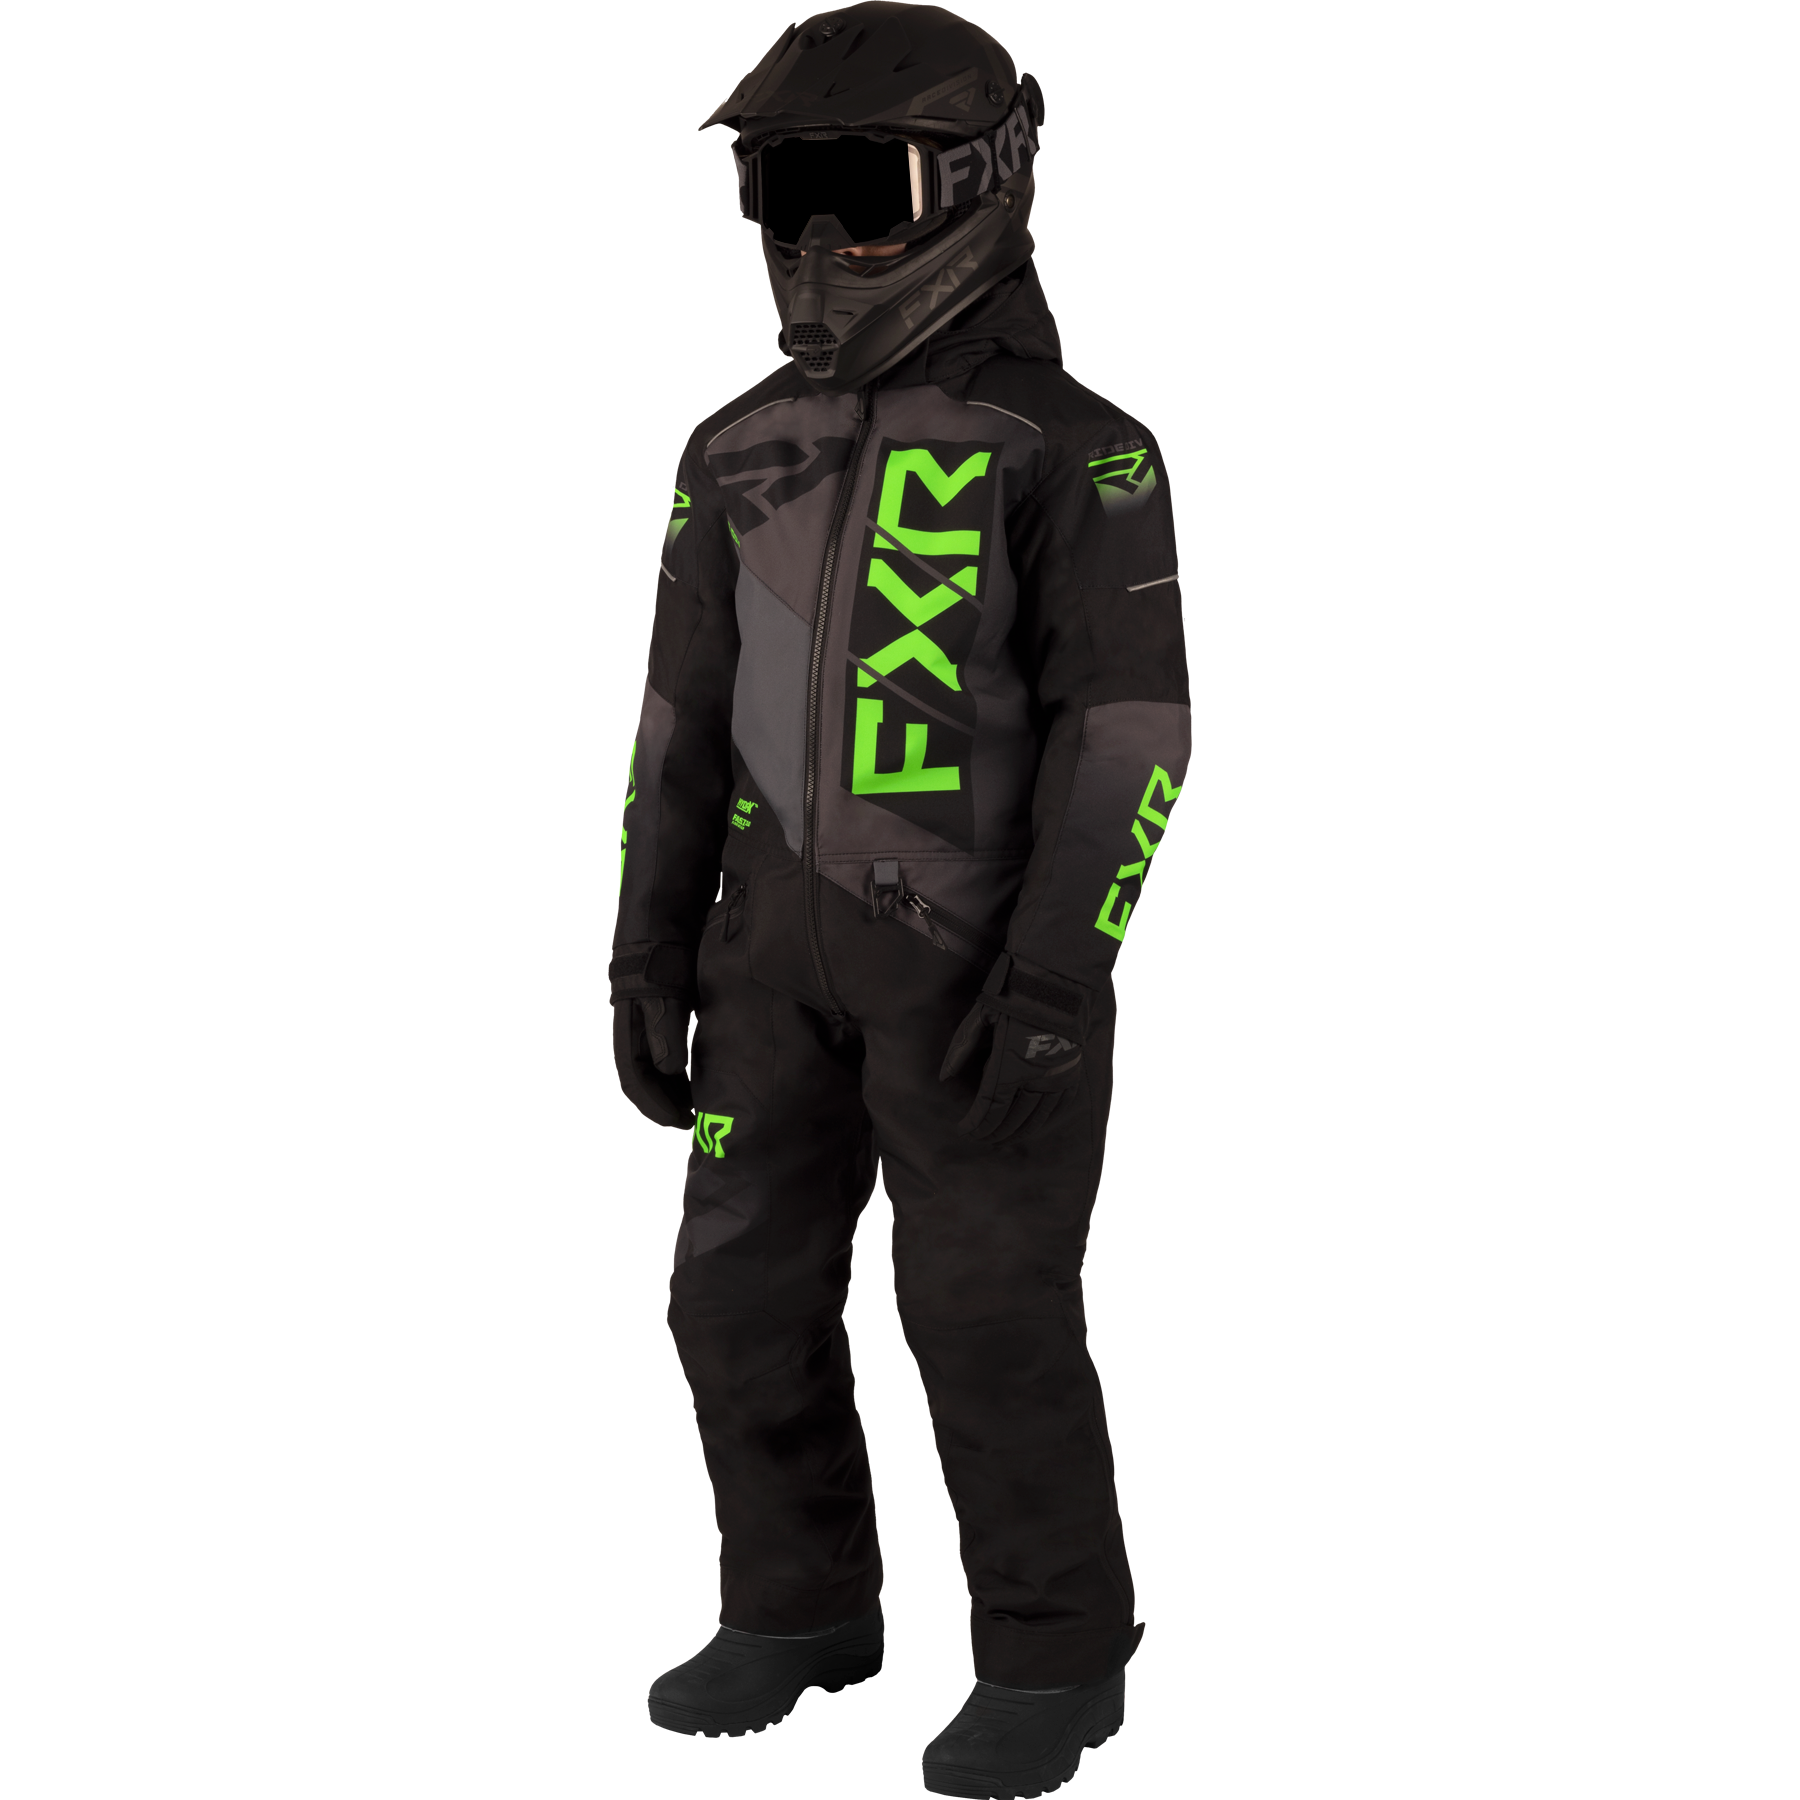 Onepiece FXR Child/Youth Helium, Black/Char/Lime